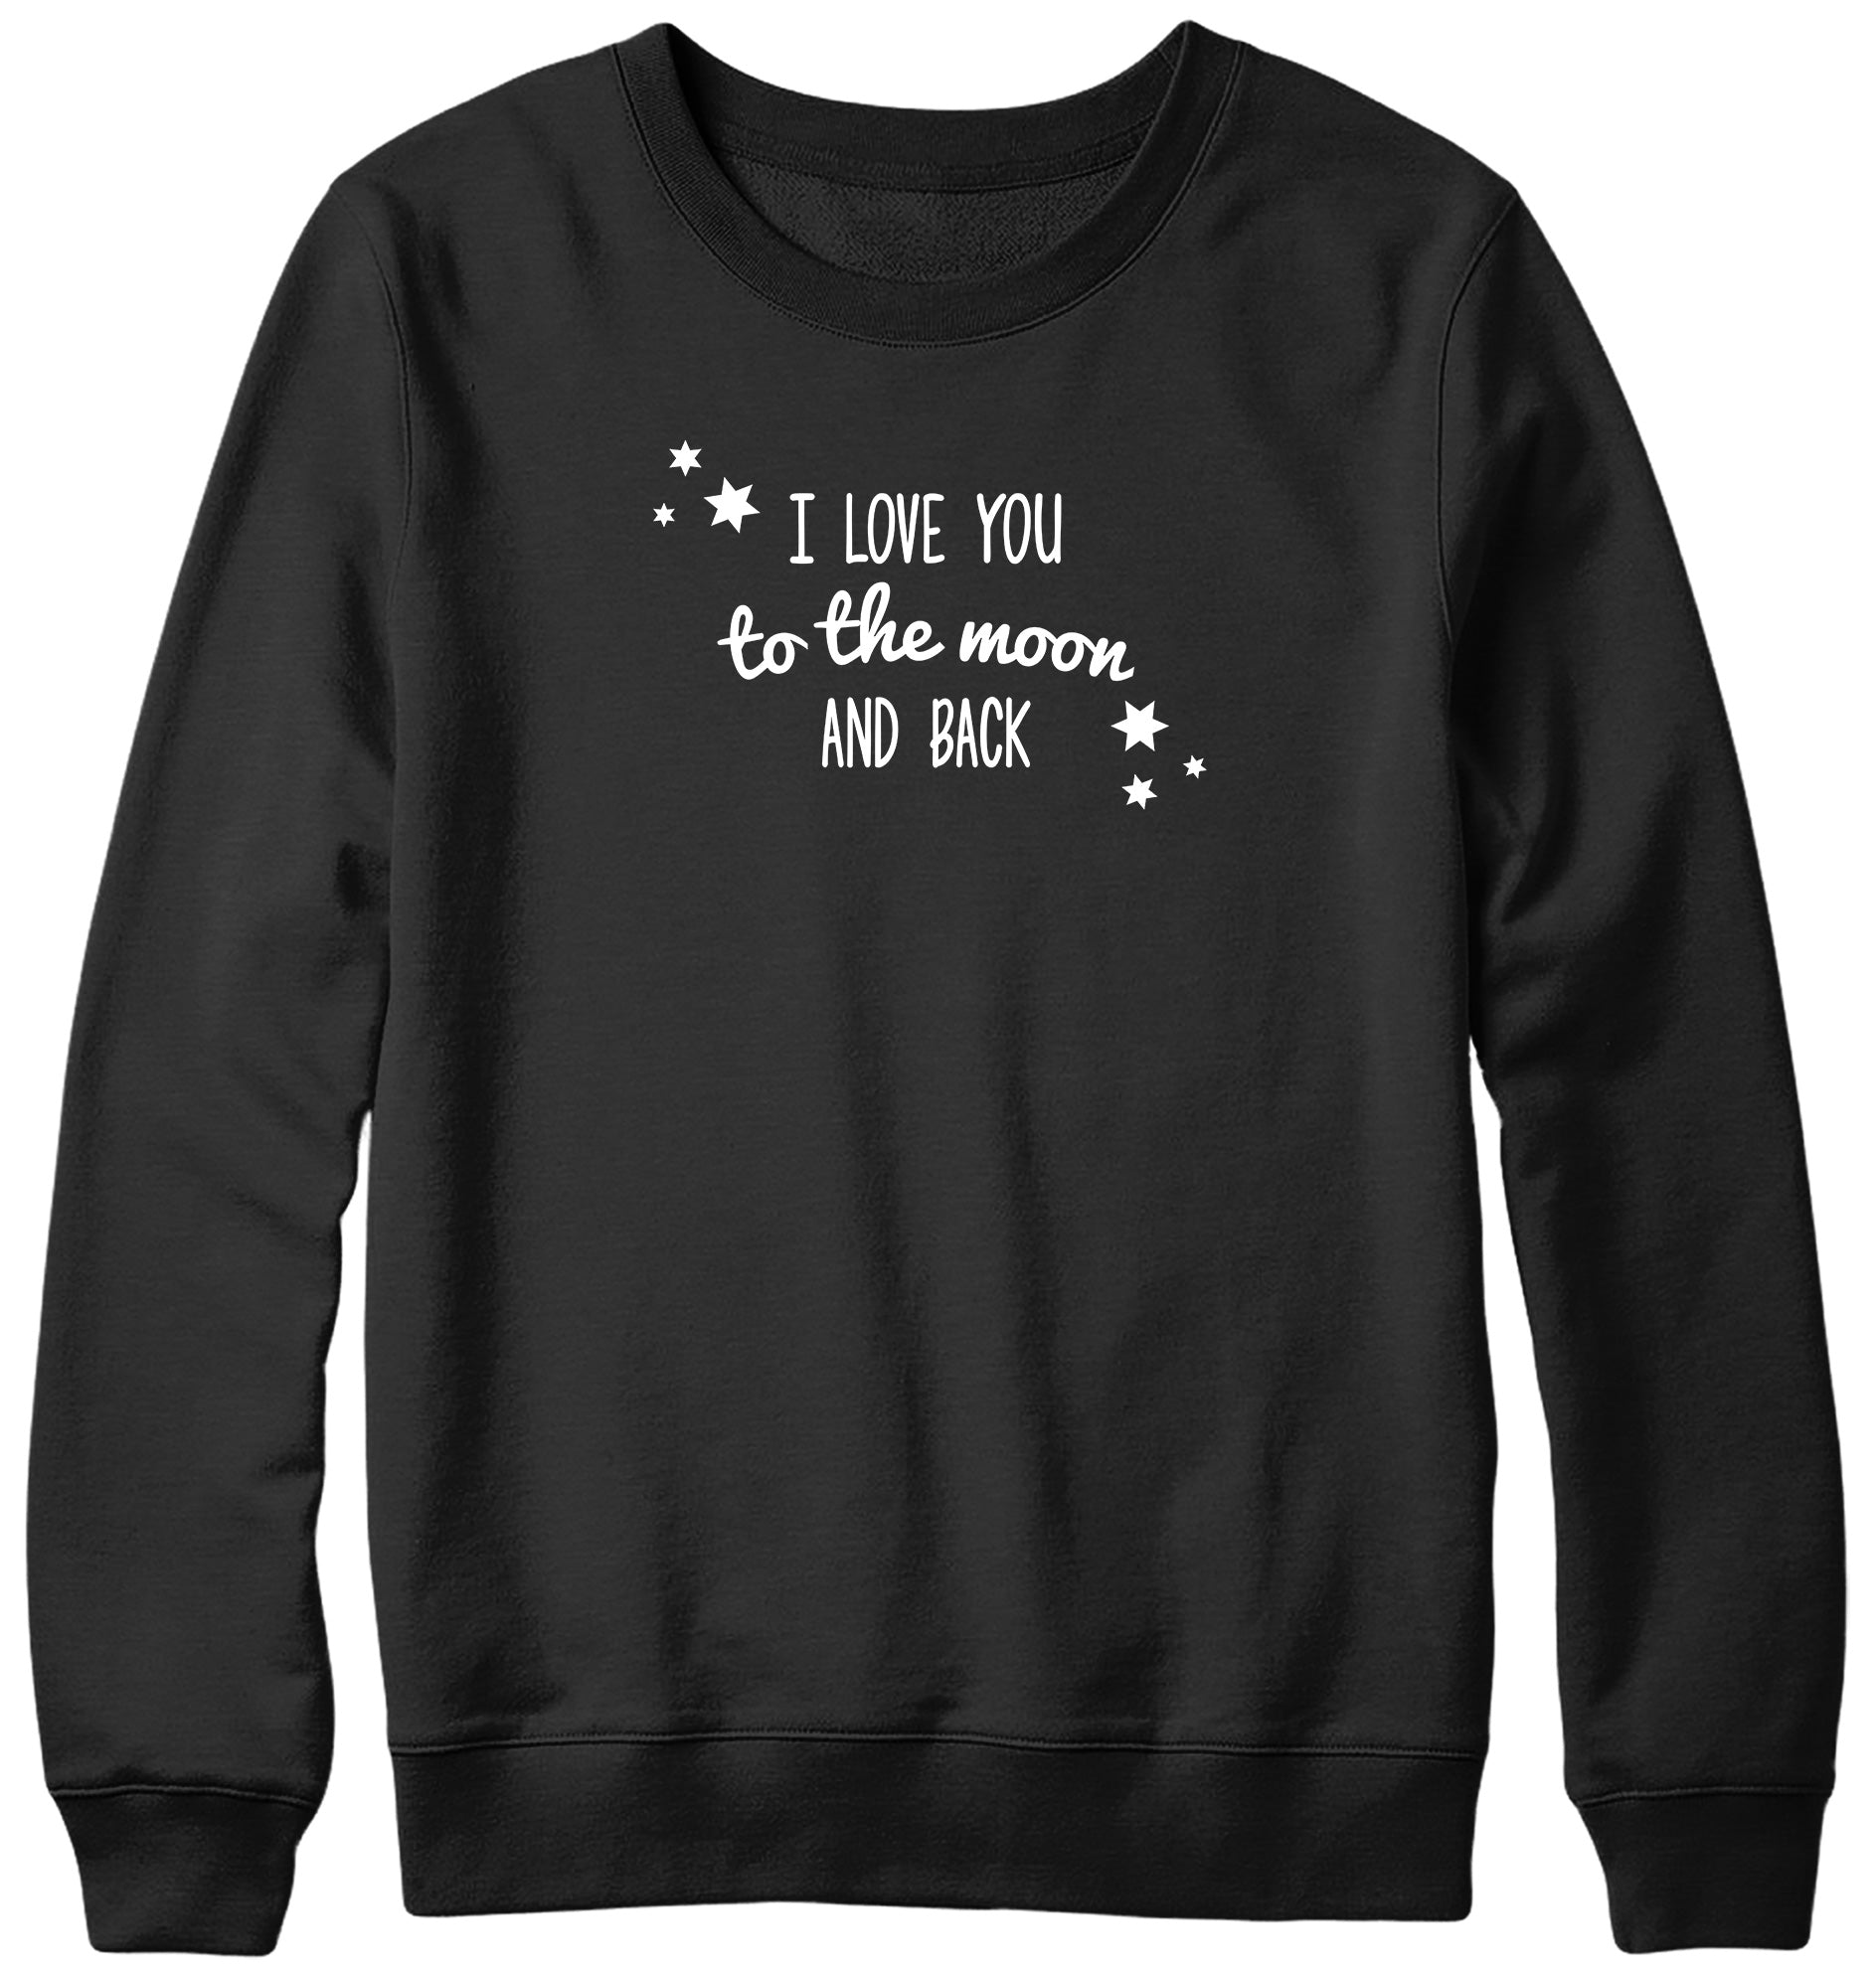 I LOVE YOU TO THE MOON AND BACK MENS LADIES WOMENS UNISEX SWEATSHIRT SWEATER